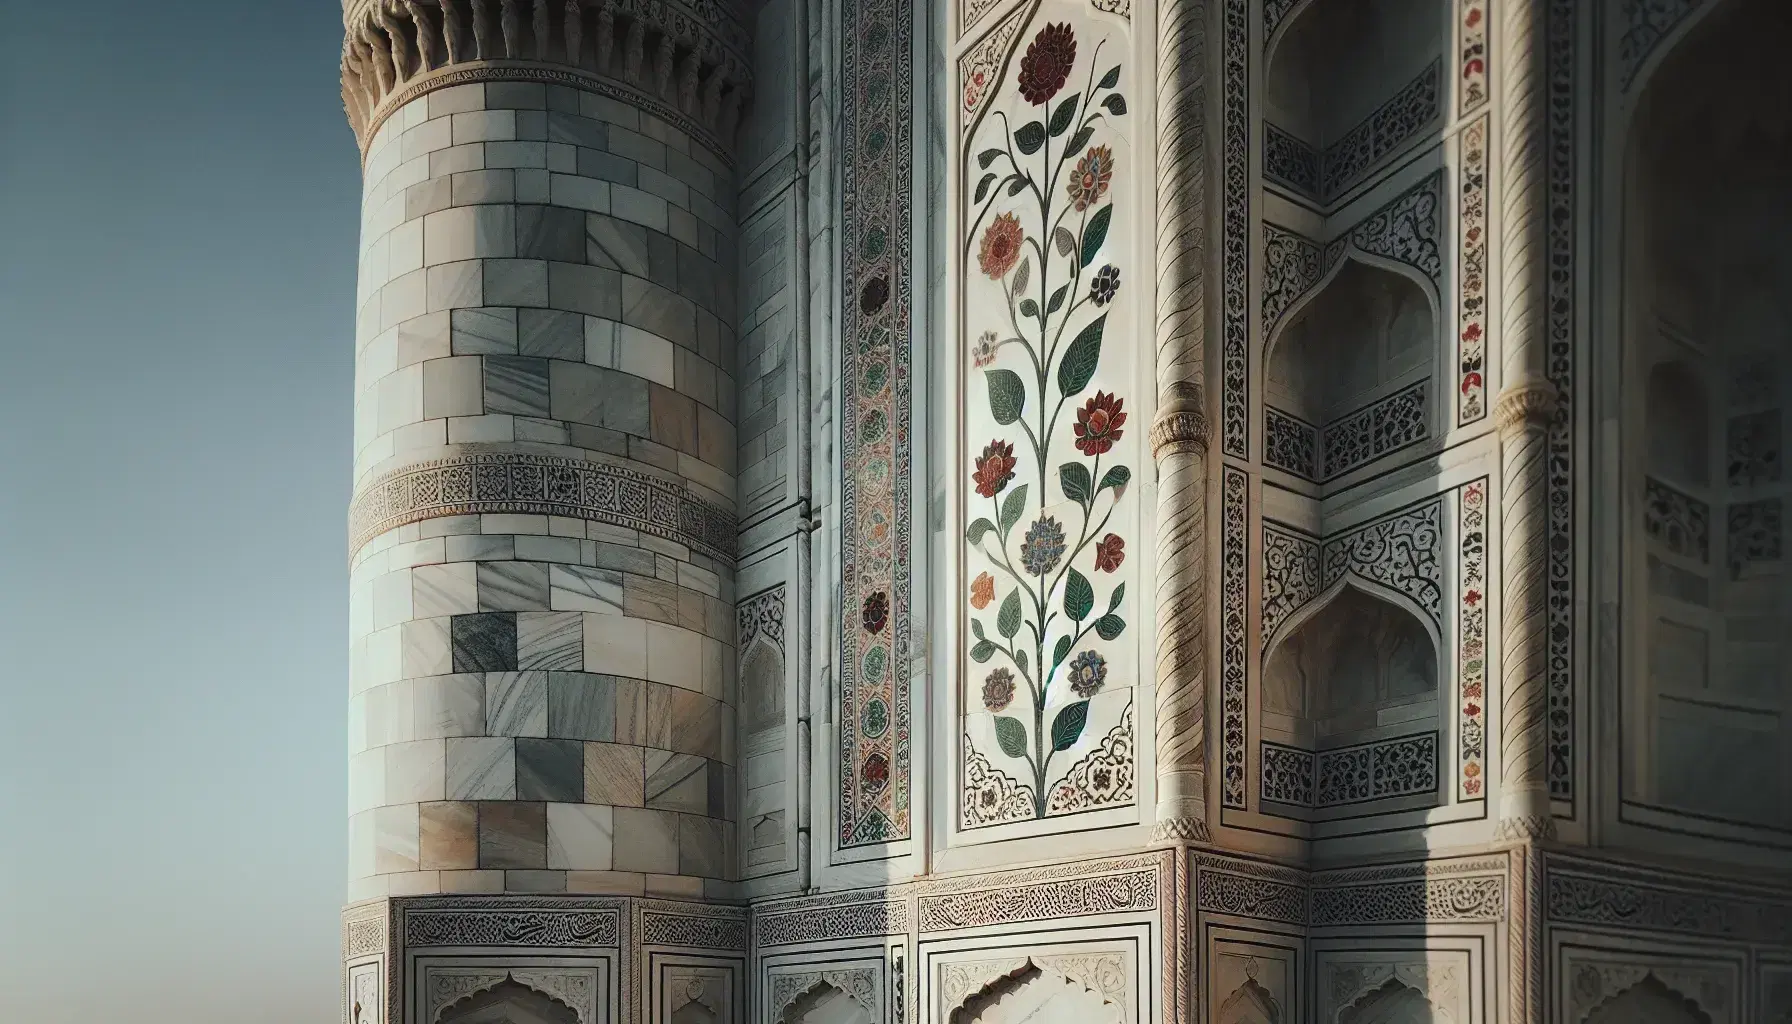 Detailed view of Taj Mahal's marble inlay and carvings with a minaret base against a clear blue sky, showcasing the artistry of Mughal architecture.